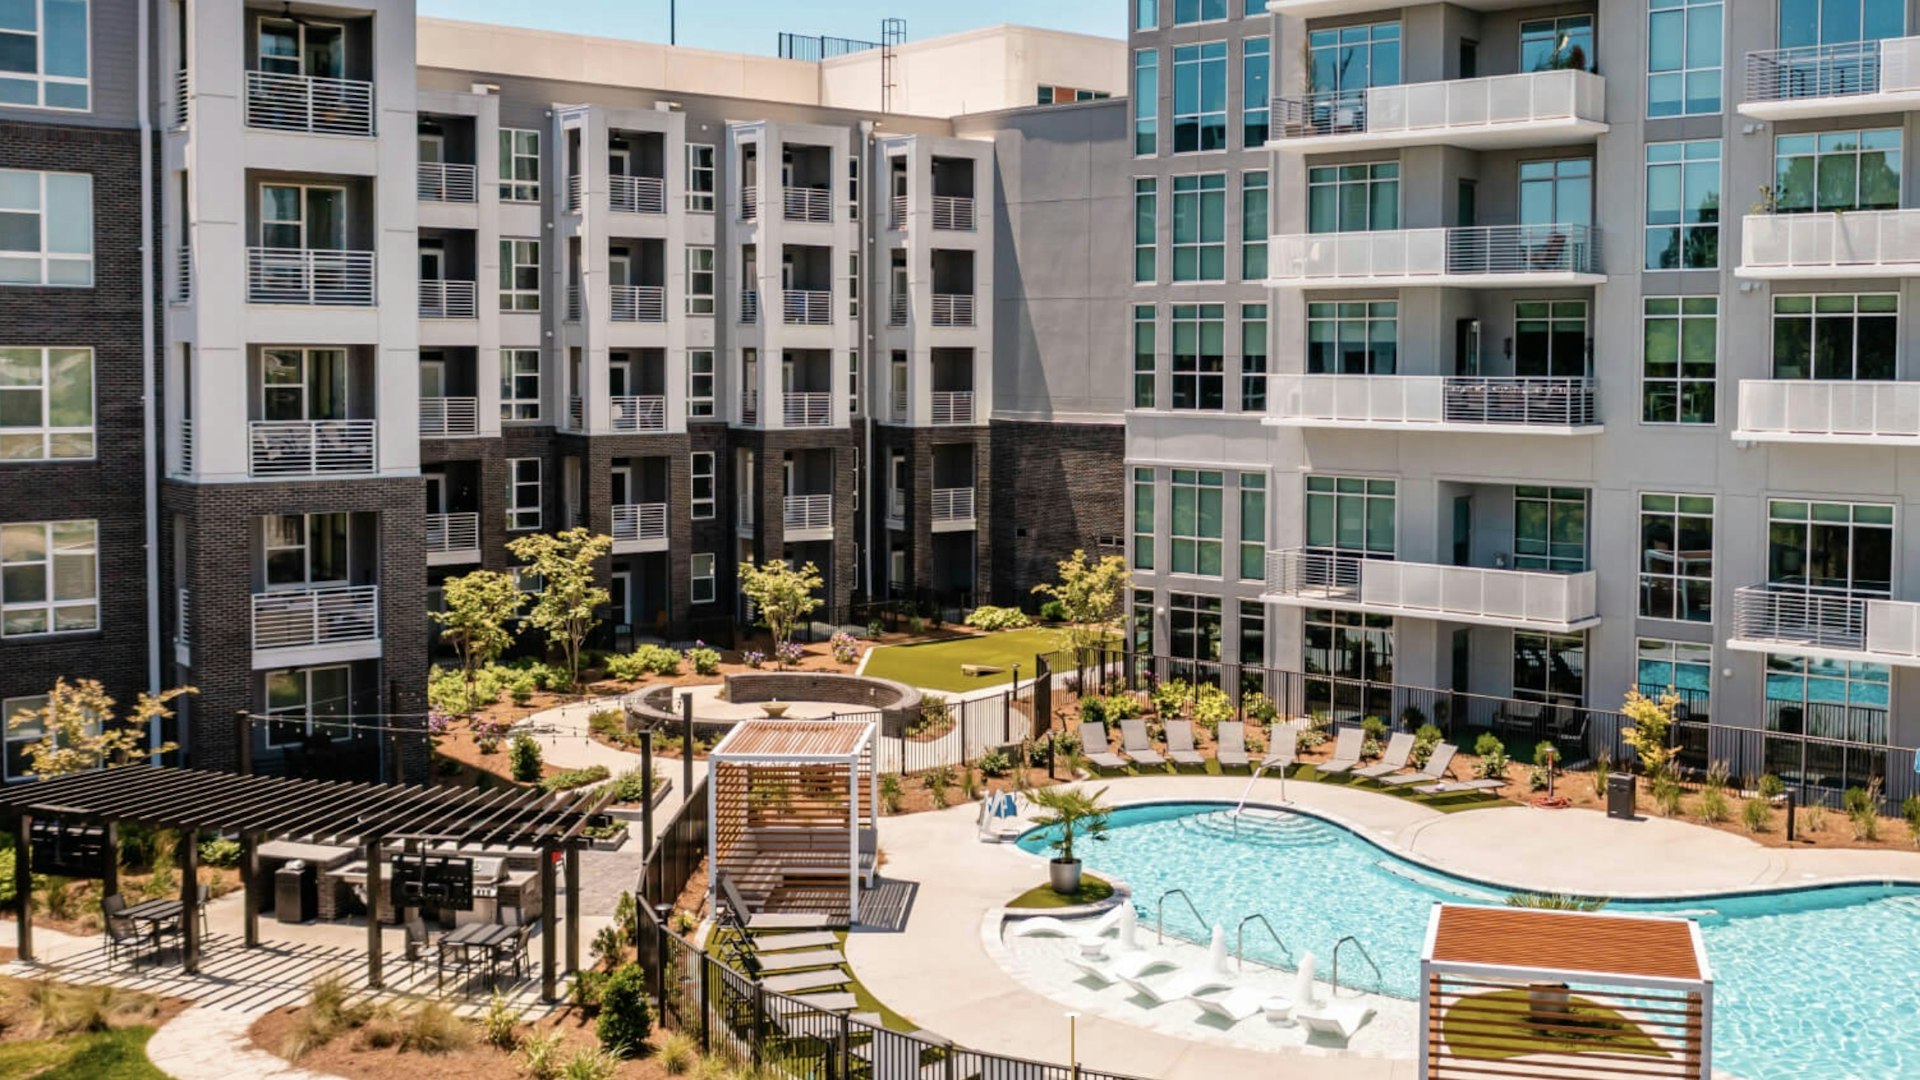 Aerial view of Towerview apartments and pool amenity space